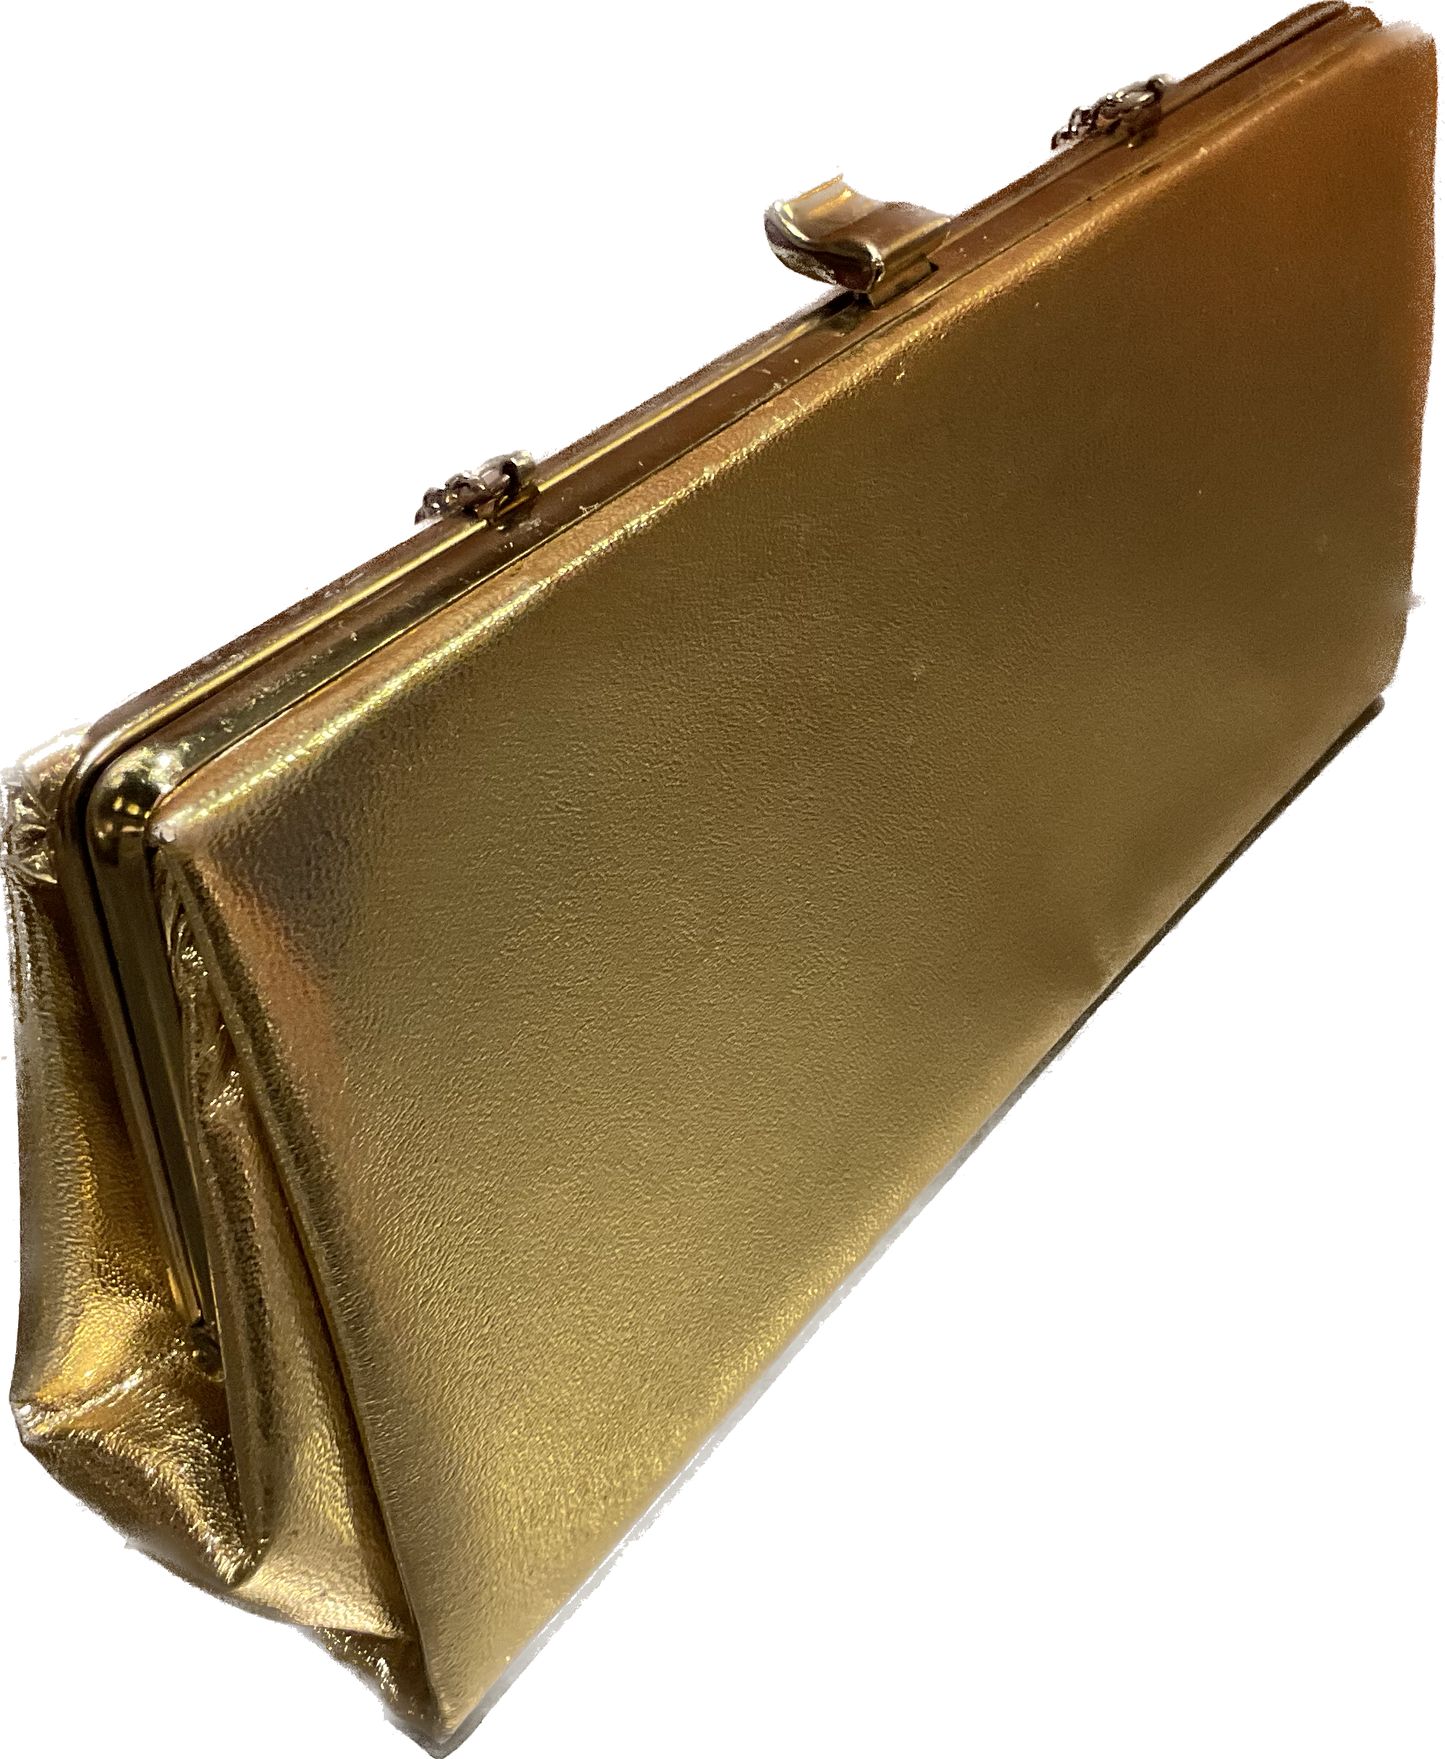 Vintage Metallic Gold Clutch Purse with Chain